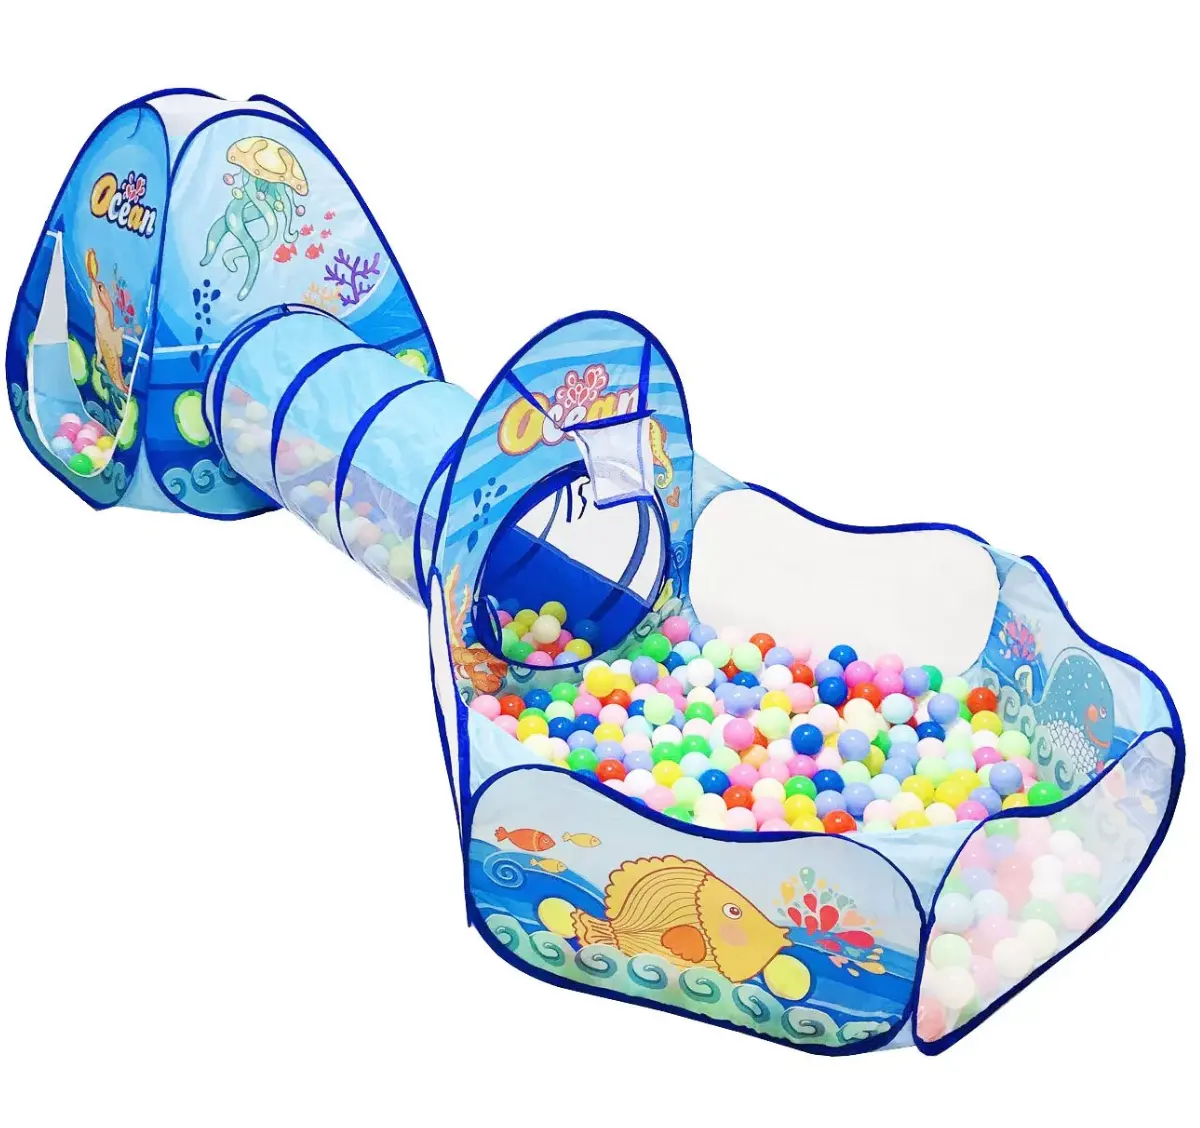 Kids Ball Pit Tents and Tunnels Toddler Gym Play Tent with Play Crawl Tunnel Toy